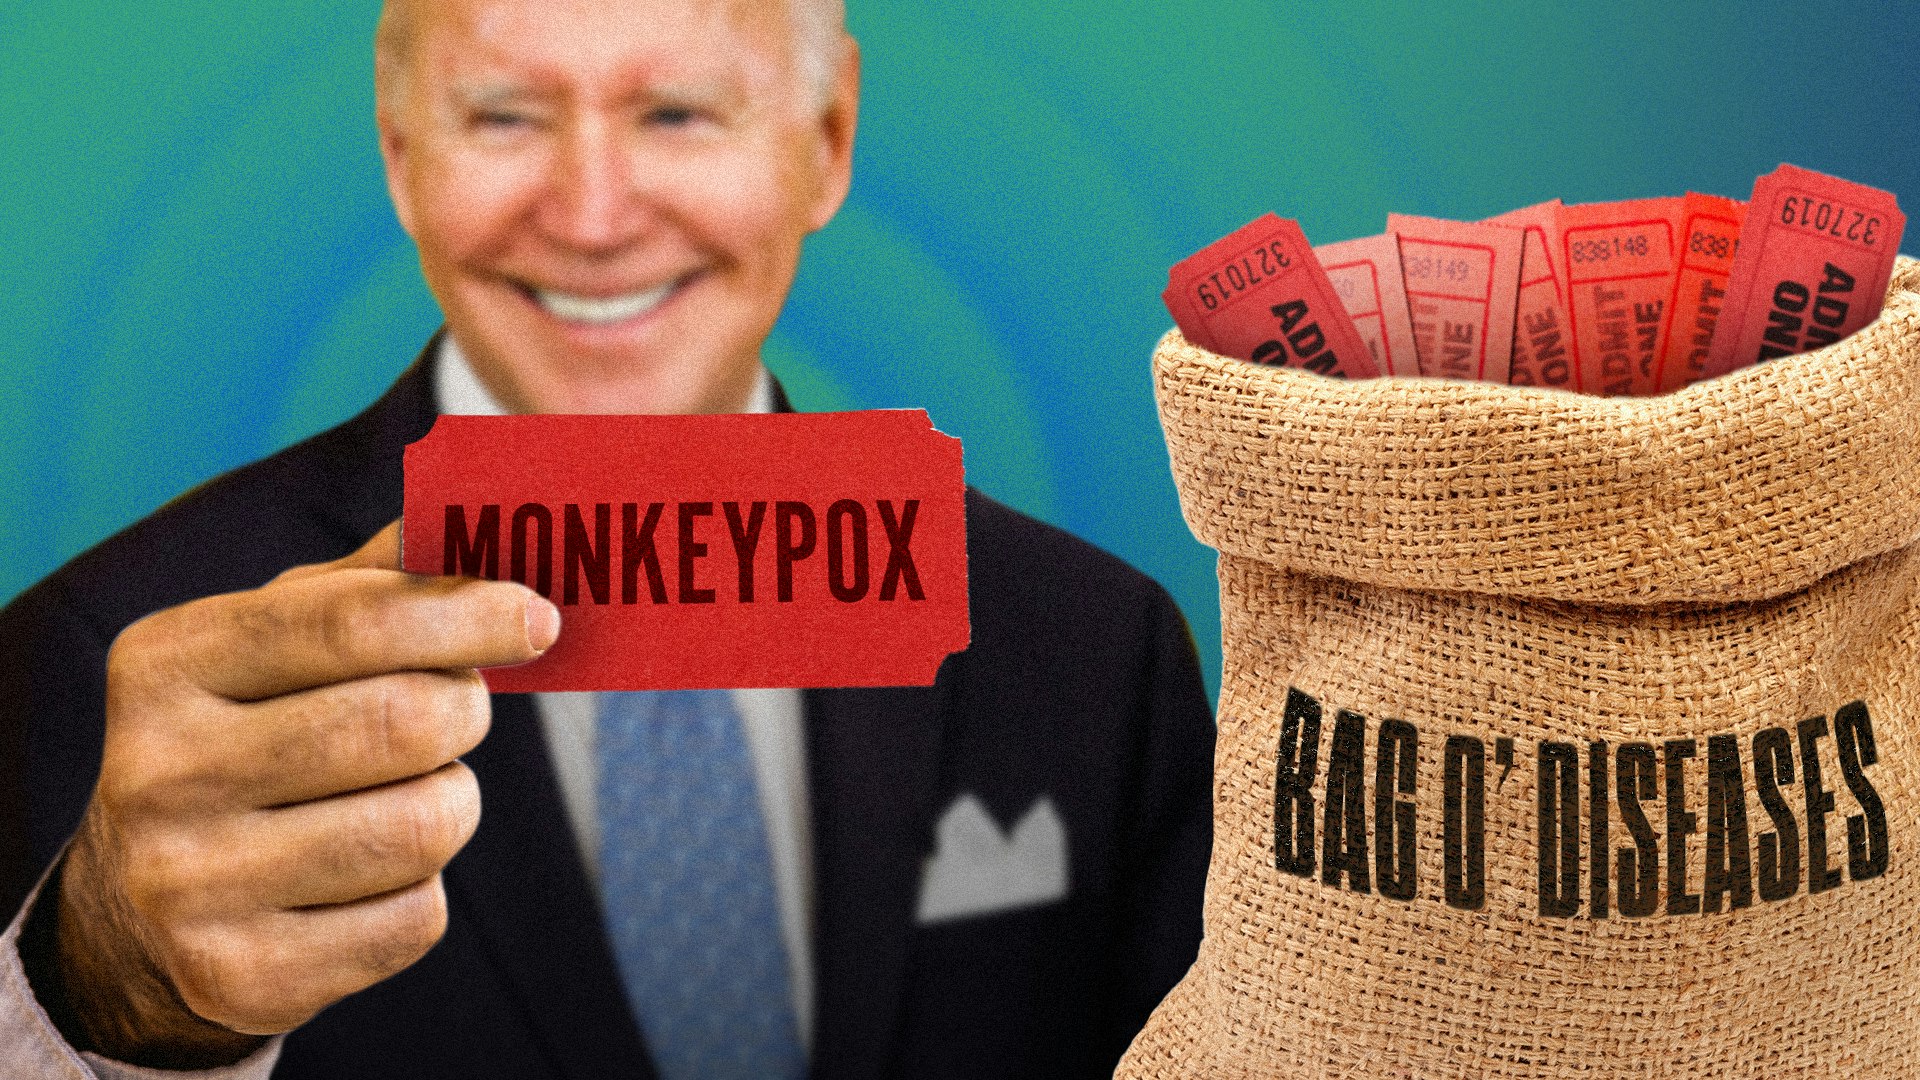 Ep. 957 - You Can't Make Me Care About Monkeypox